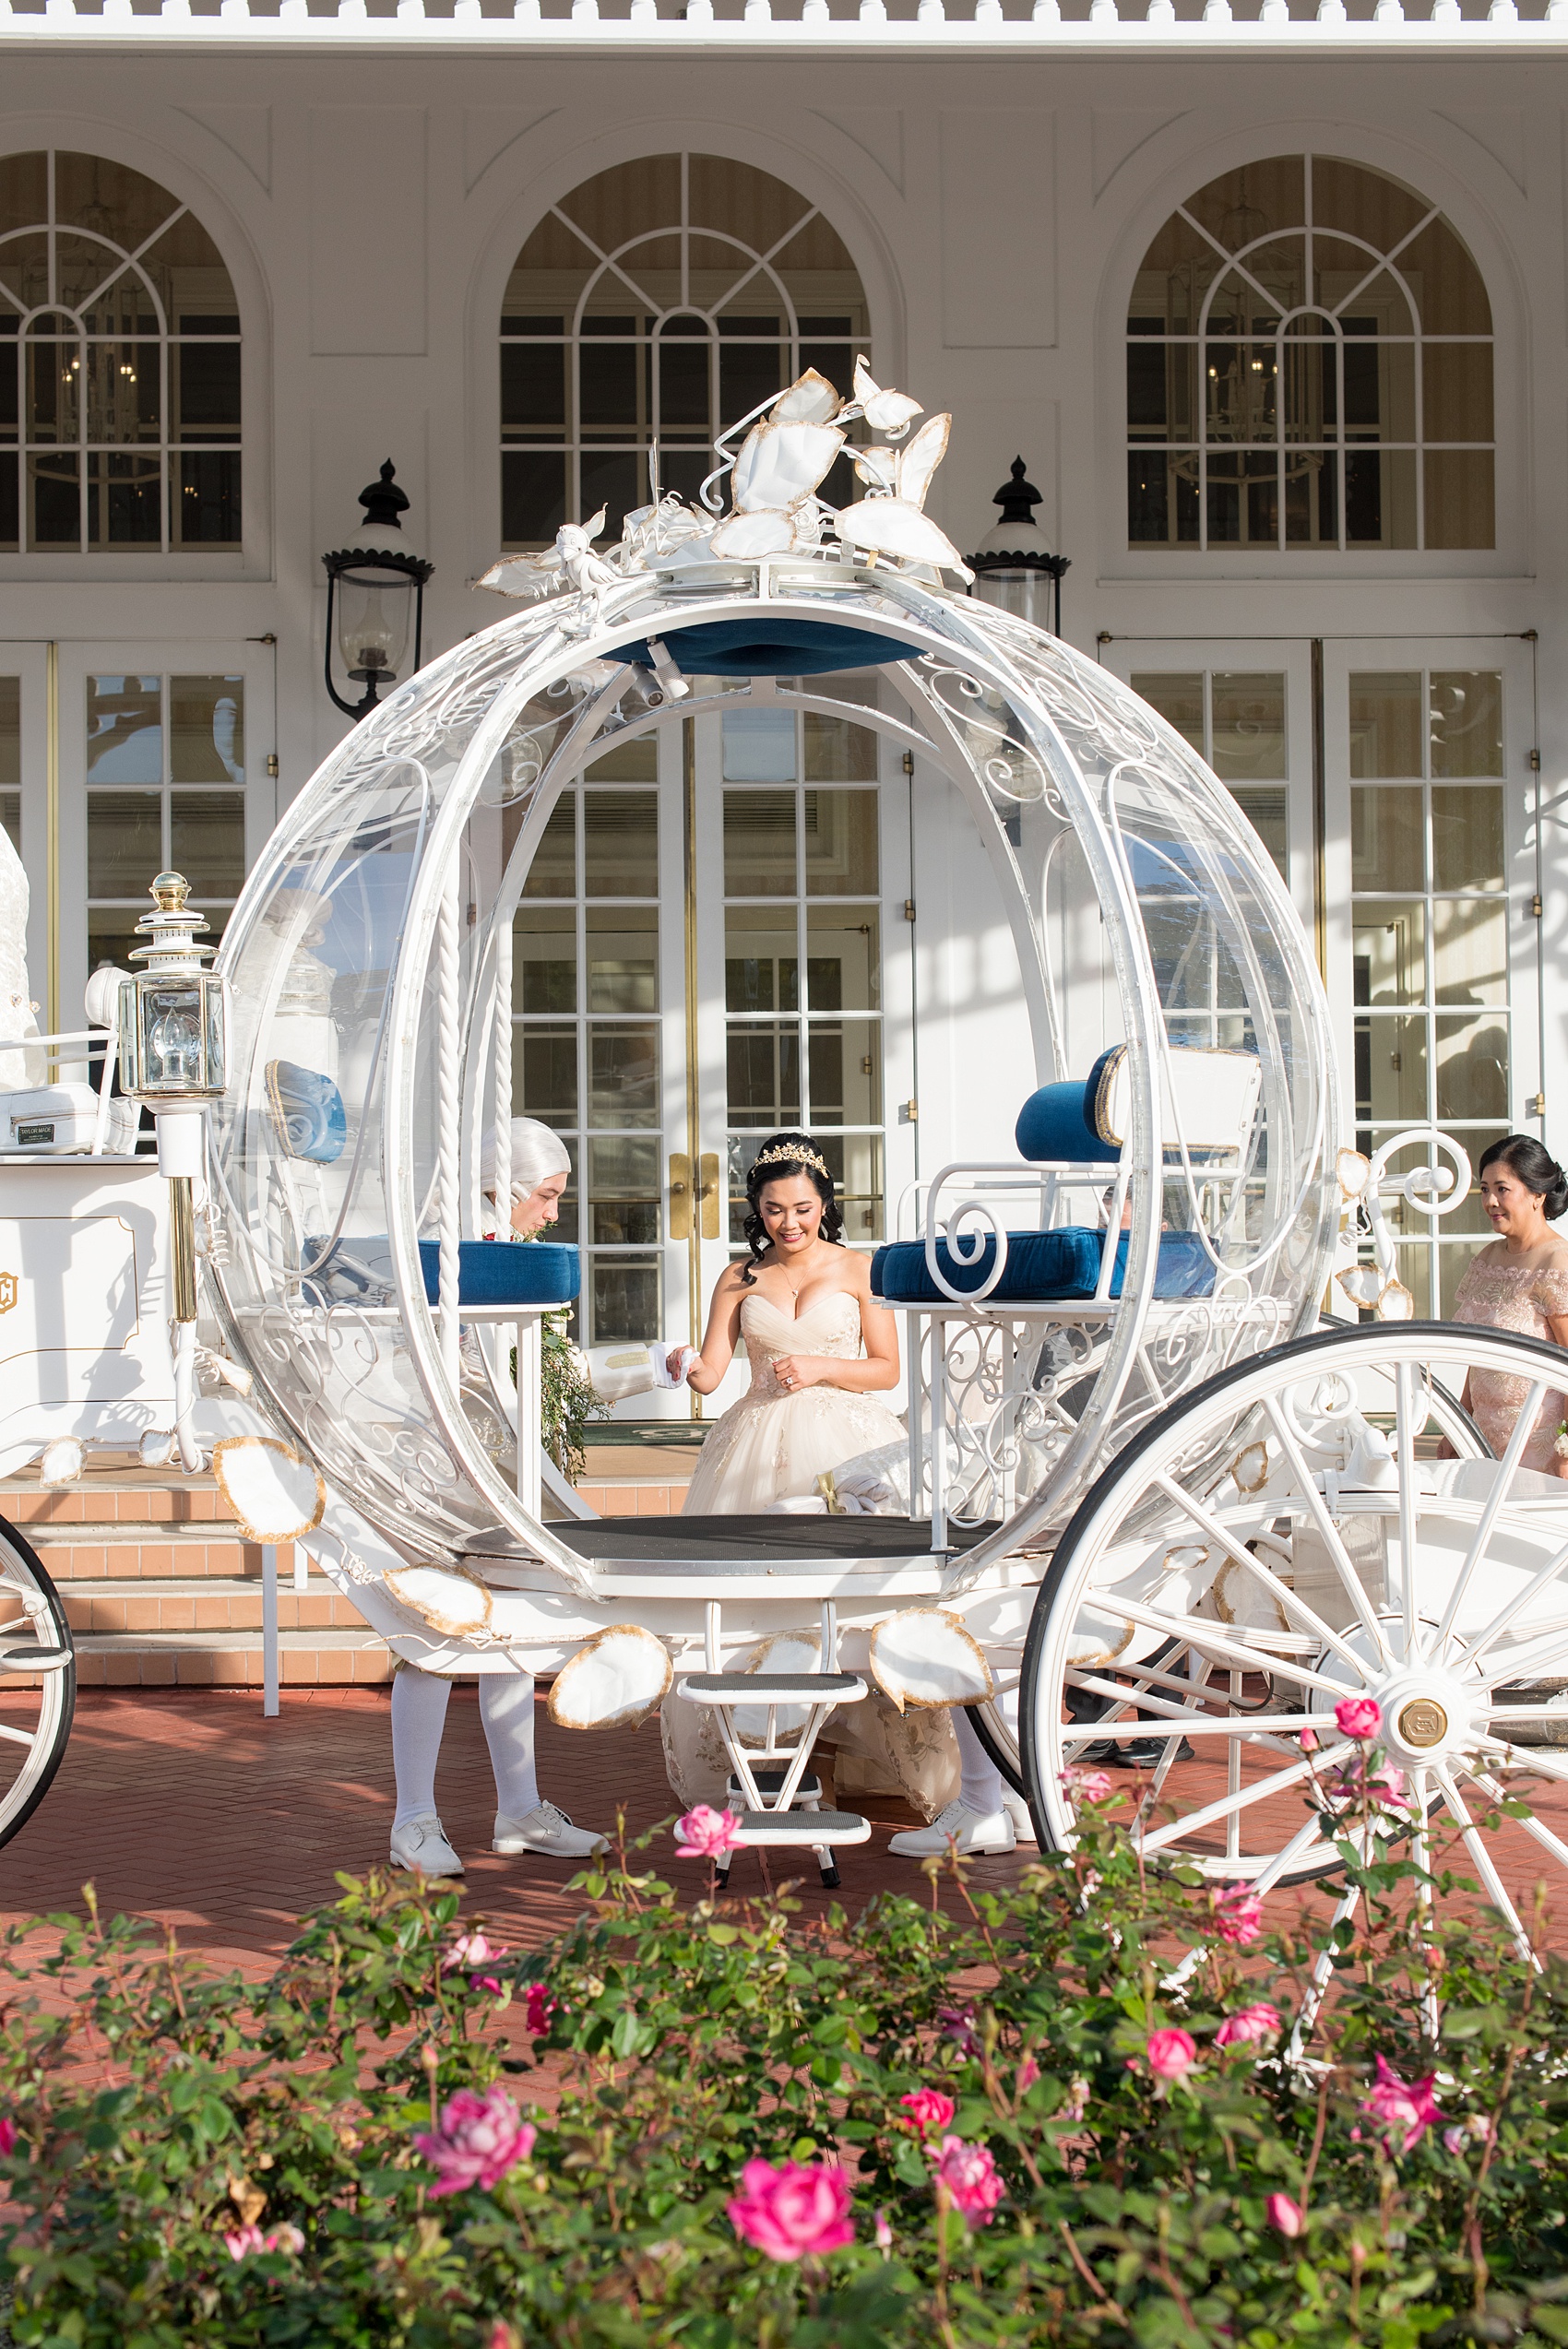 Walt Disney World photographs by Mikkel Paige Photography. The bride and groom celebrated to their ceremony in style in Cinderella’s Glass Coach with white ponies. They took pictures at the Grand Floridian Resort and Wedding Pavilion with this awesome transportation. #disneywedding #disneybride #waltdisneyworld #DisneyWorldWedding #CinderellaCarriage #GlassCoach